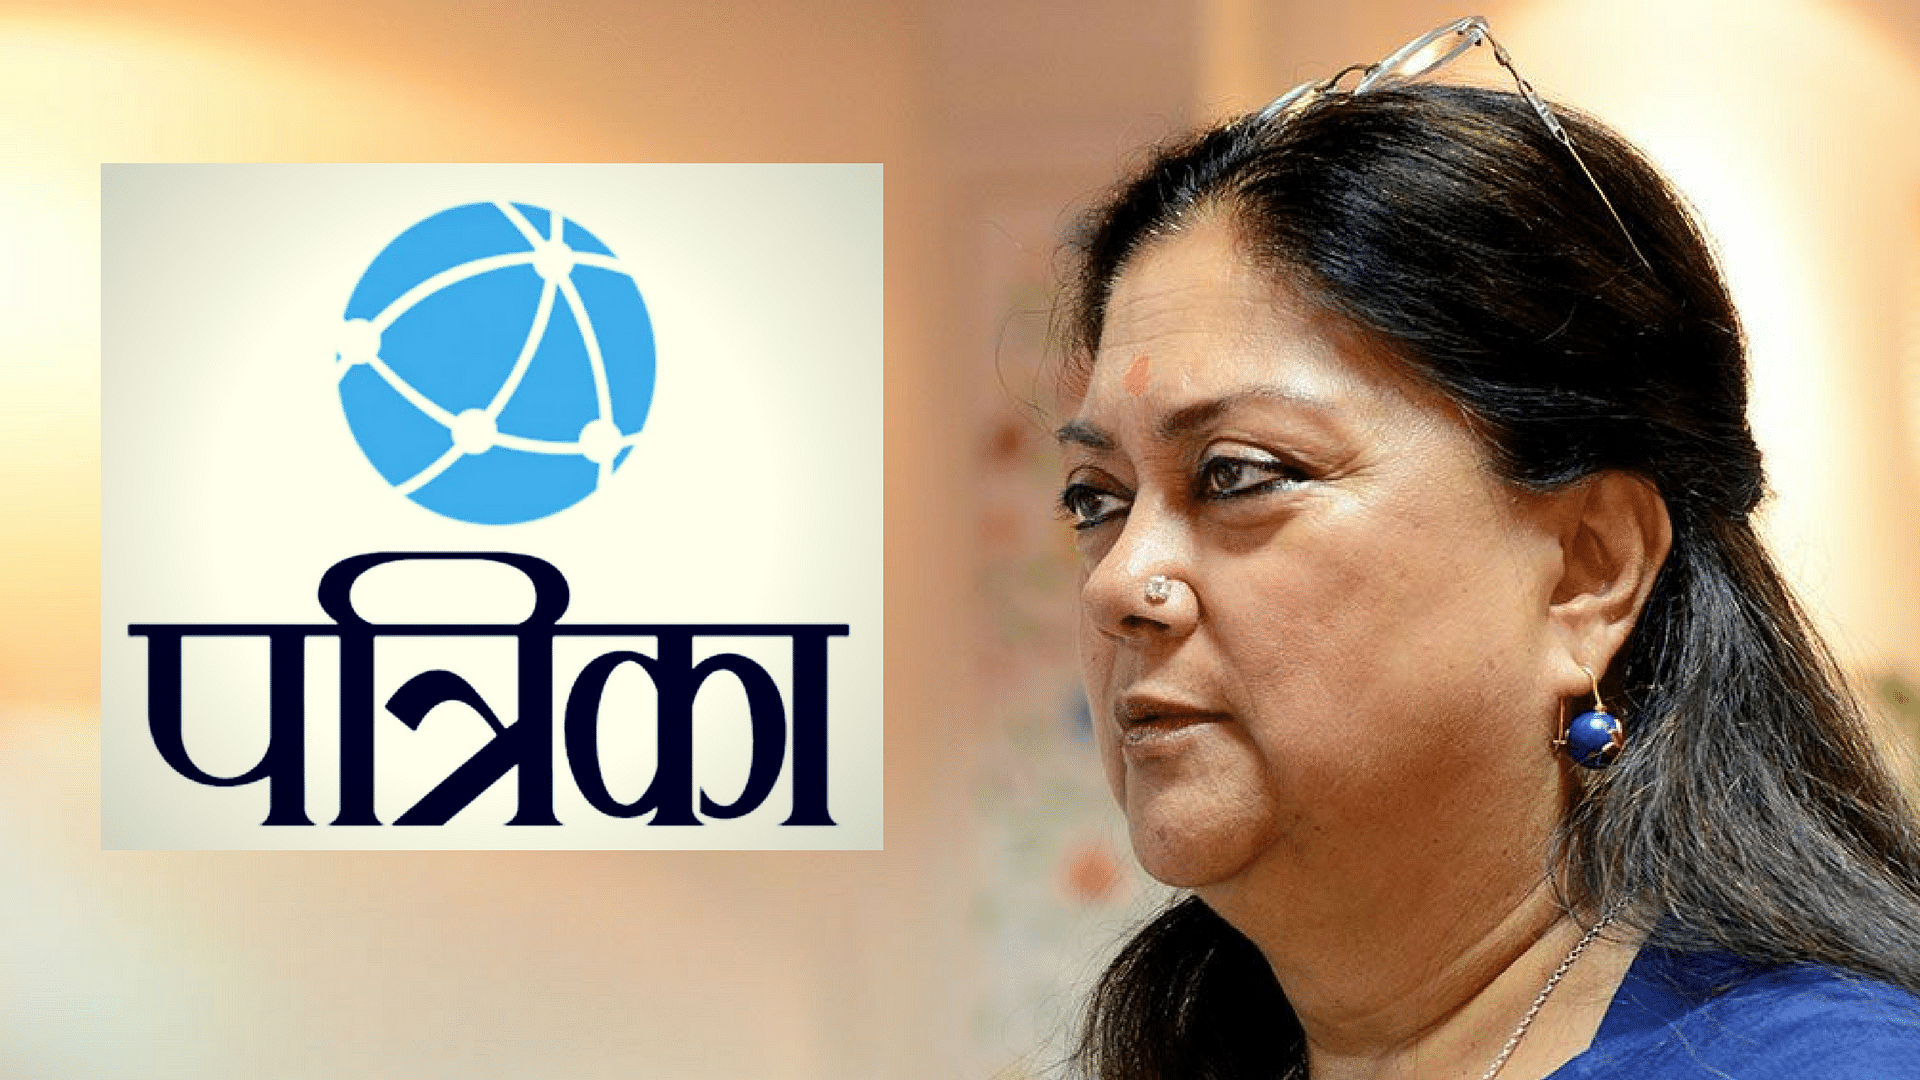 Rajasthan Patrika said it won’t report any news related to the state’s Chief Minister Vasundhara Raje.